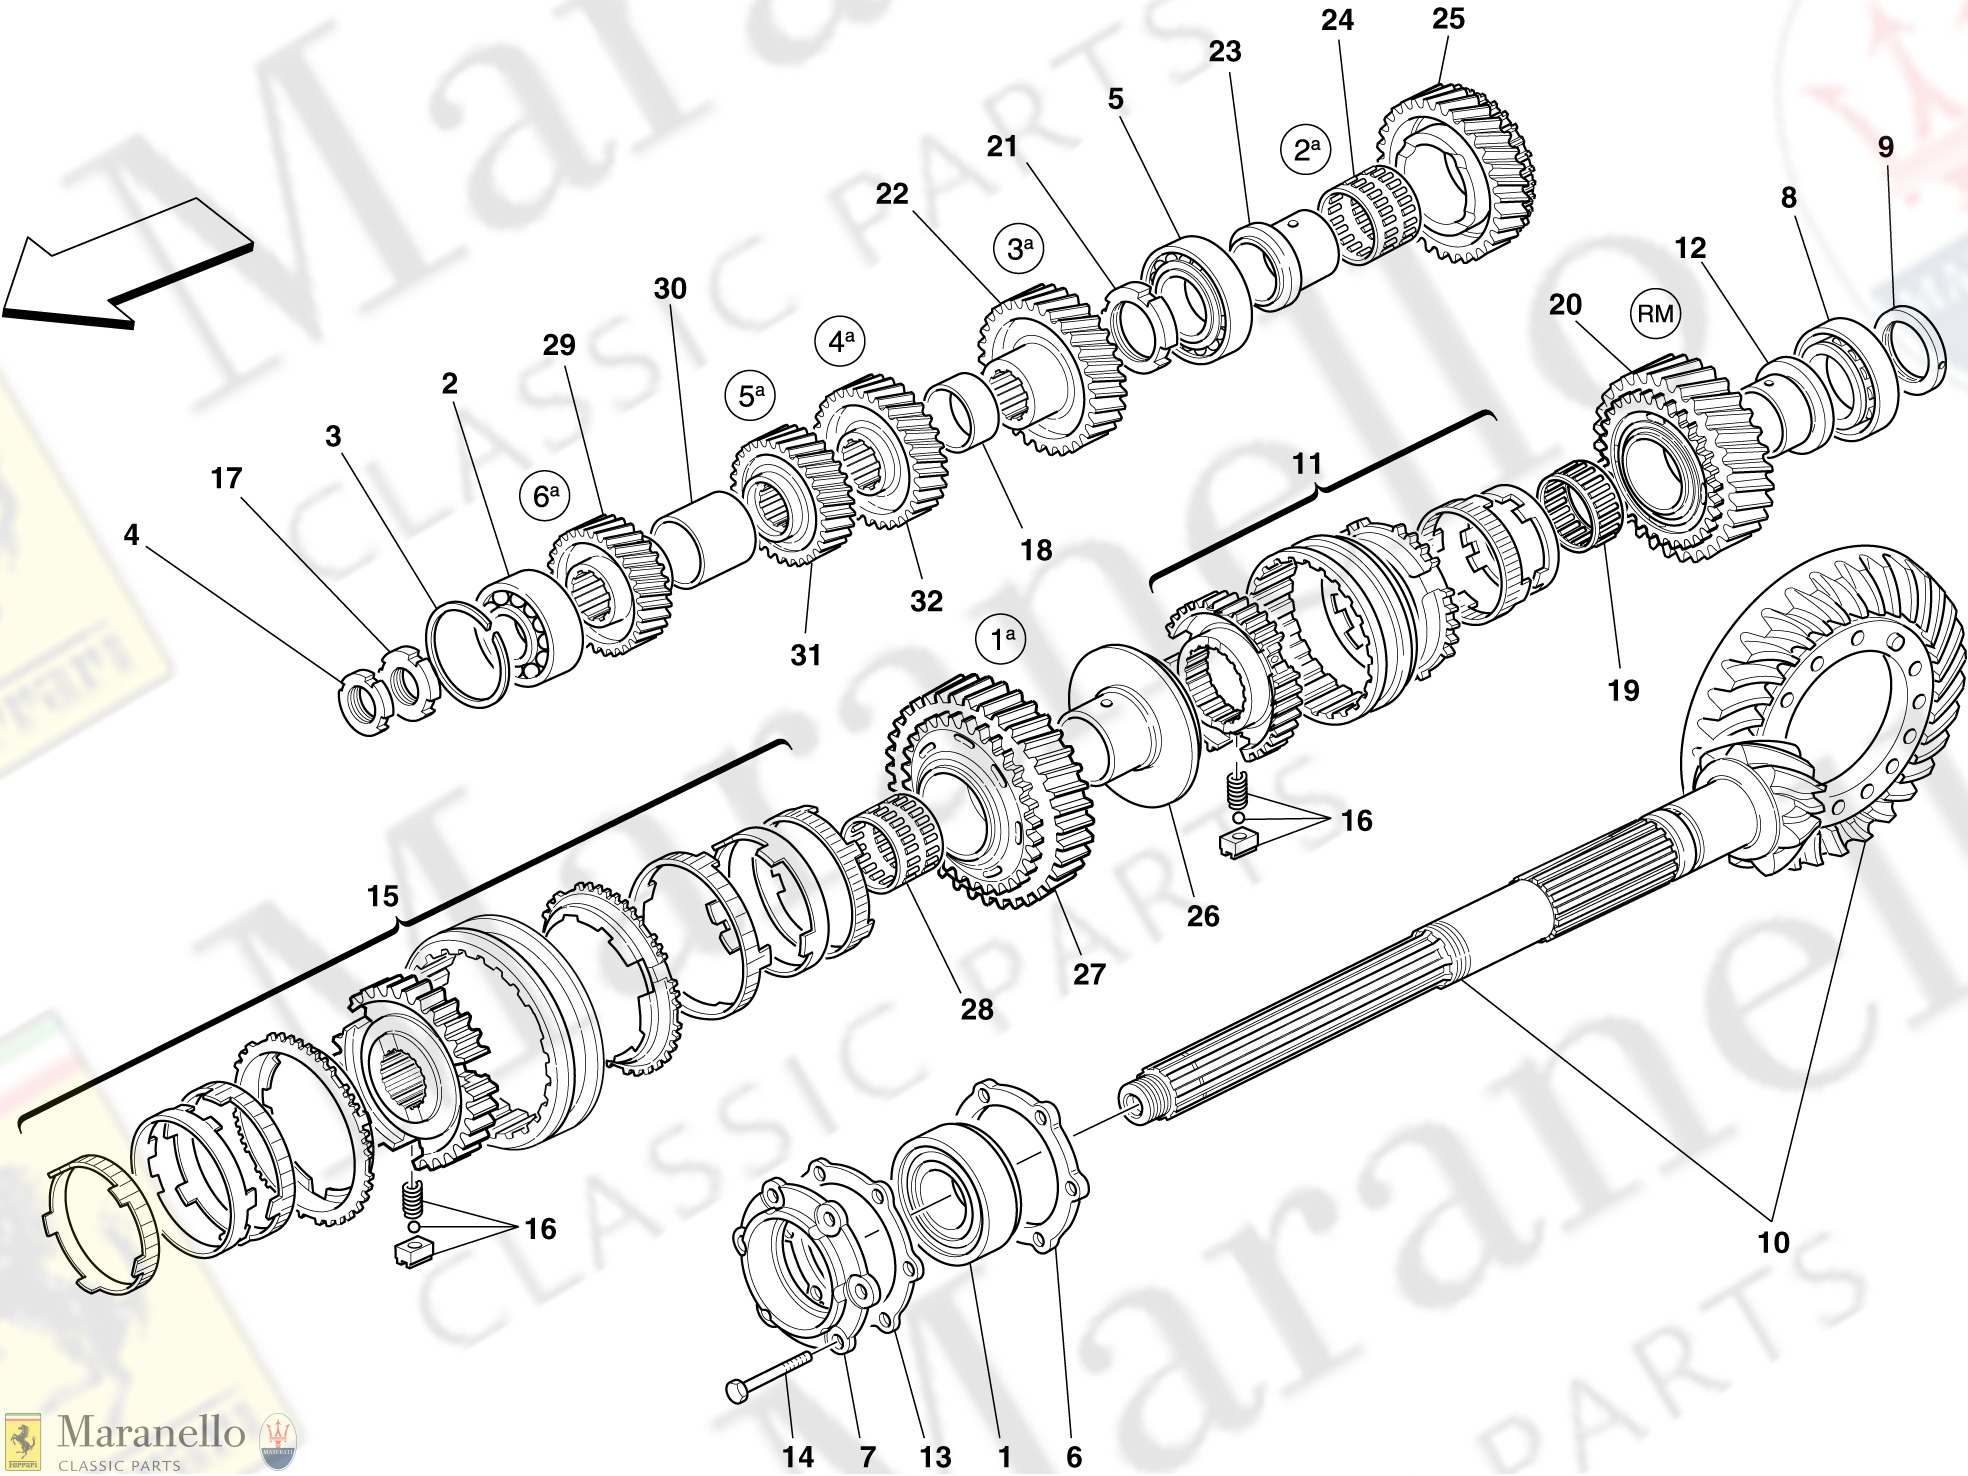 027 - Secondary Gearbox Shaft Gears